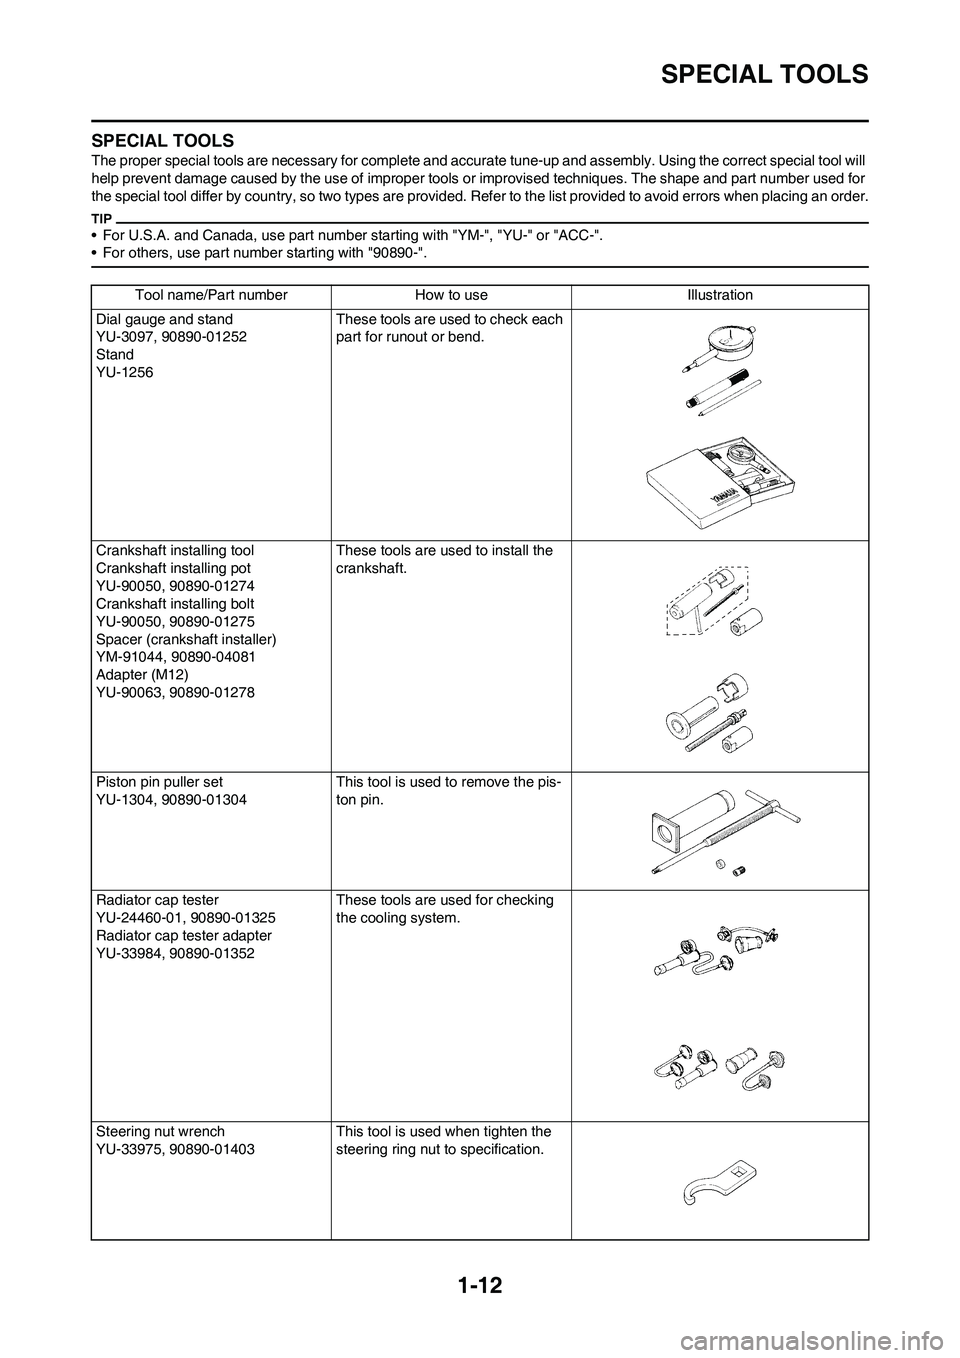 YAMAHA YZ450F 2010  Owners Manual 1-12
SPECIAL TOOLS
SPECIAL TOOLS
The proper special tools are necessary for complete and accurate tune-up and assembly. Using the correct special tool will 
help prevent damage caused by the use of im